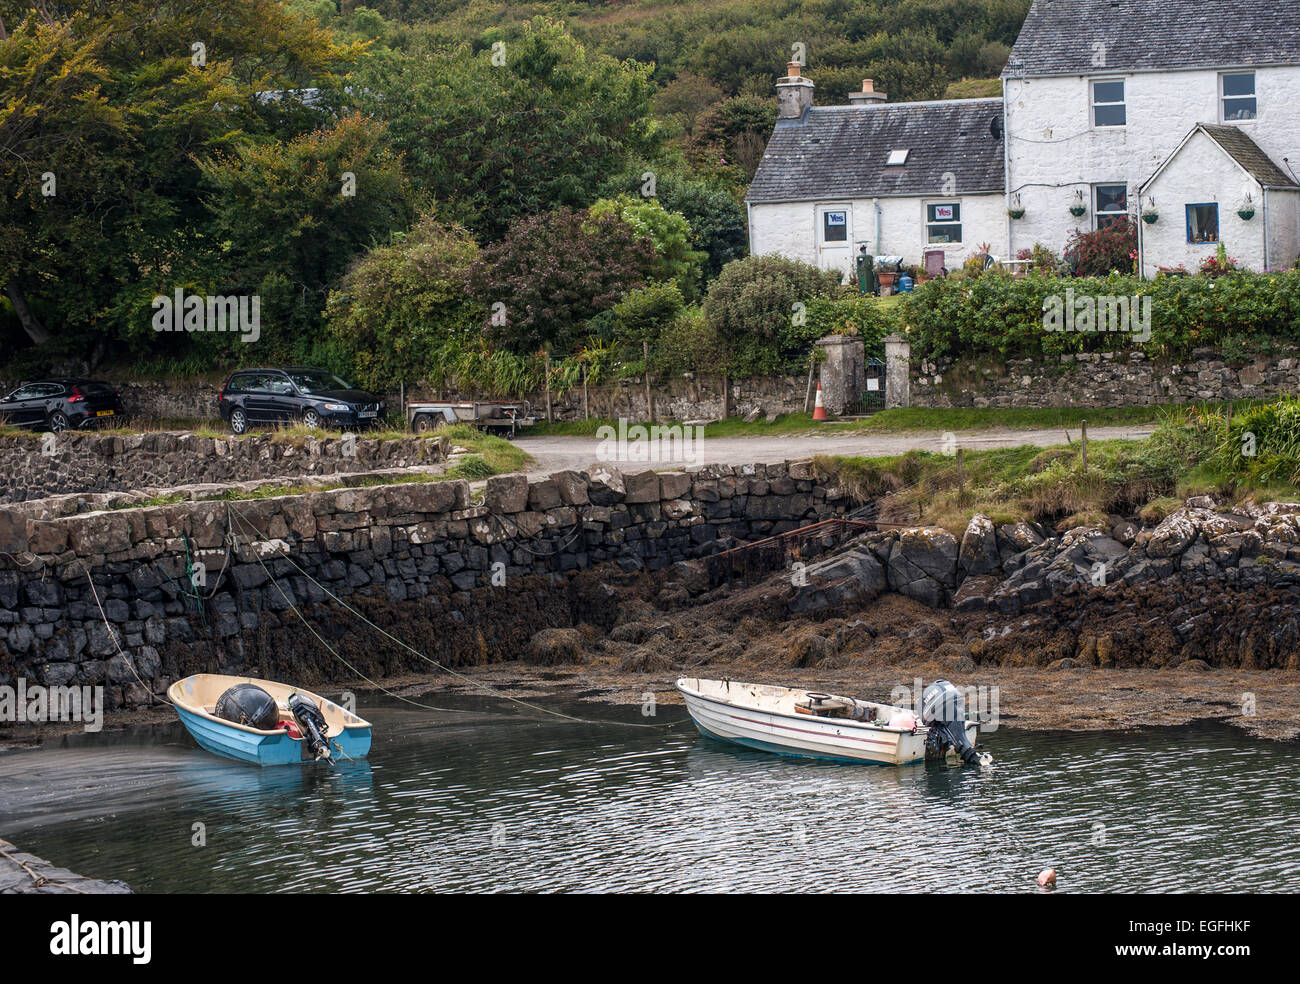 Croig Harbor Isle of Mull Ecosse Banque D'Images